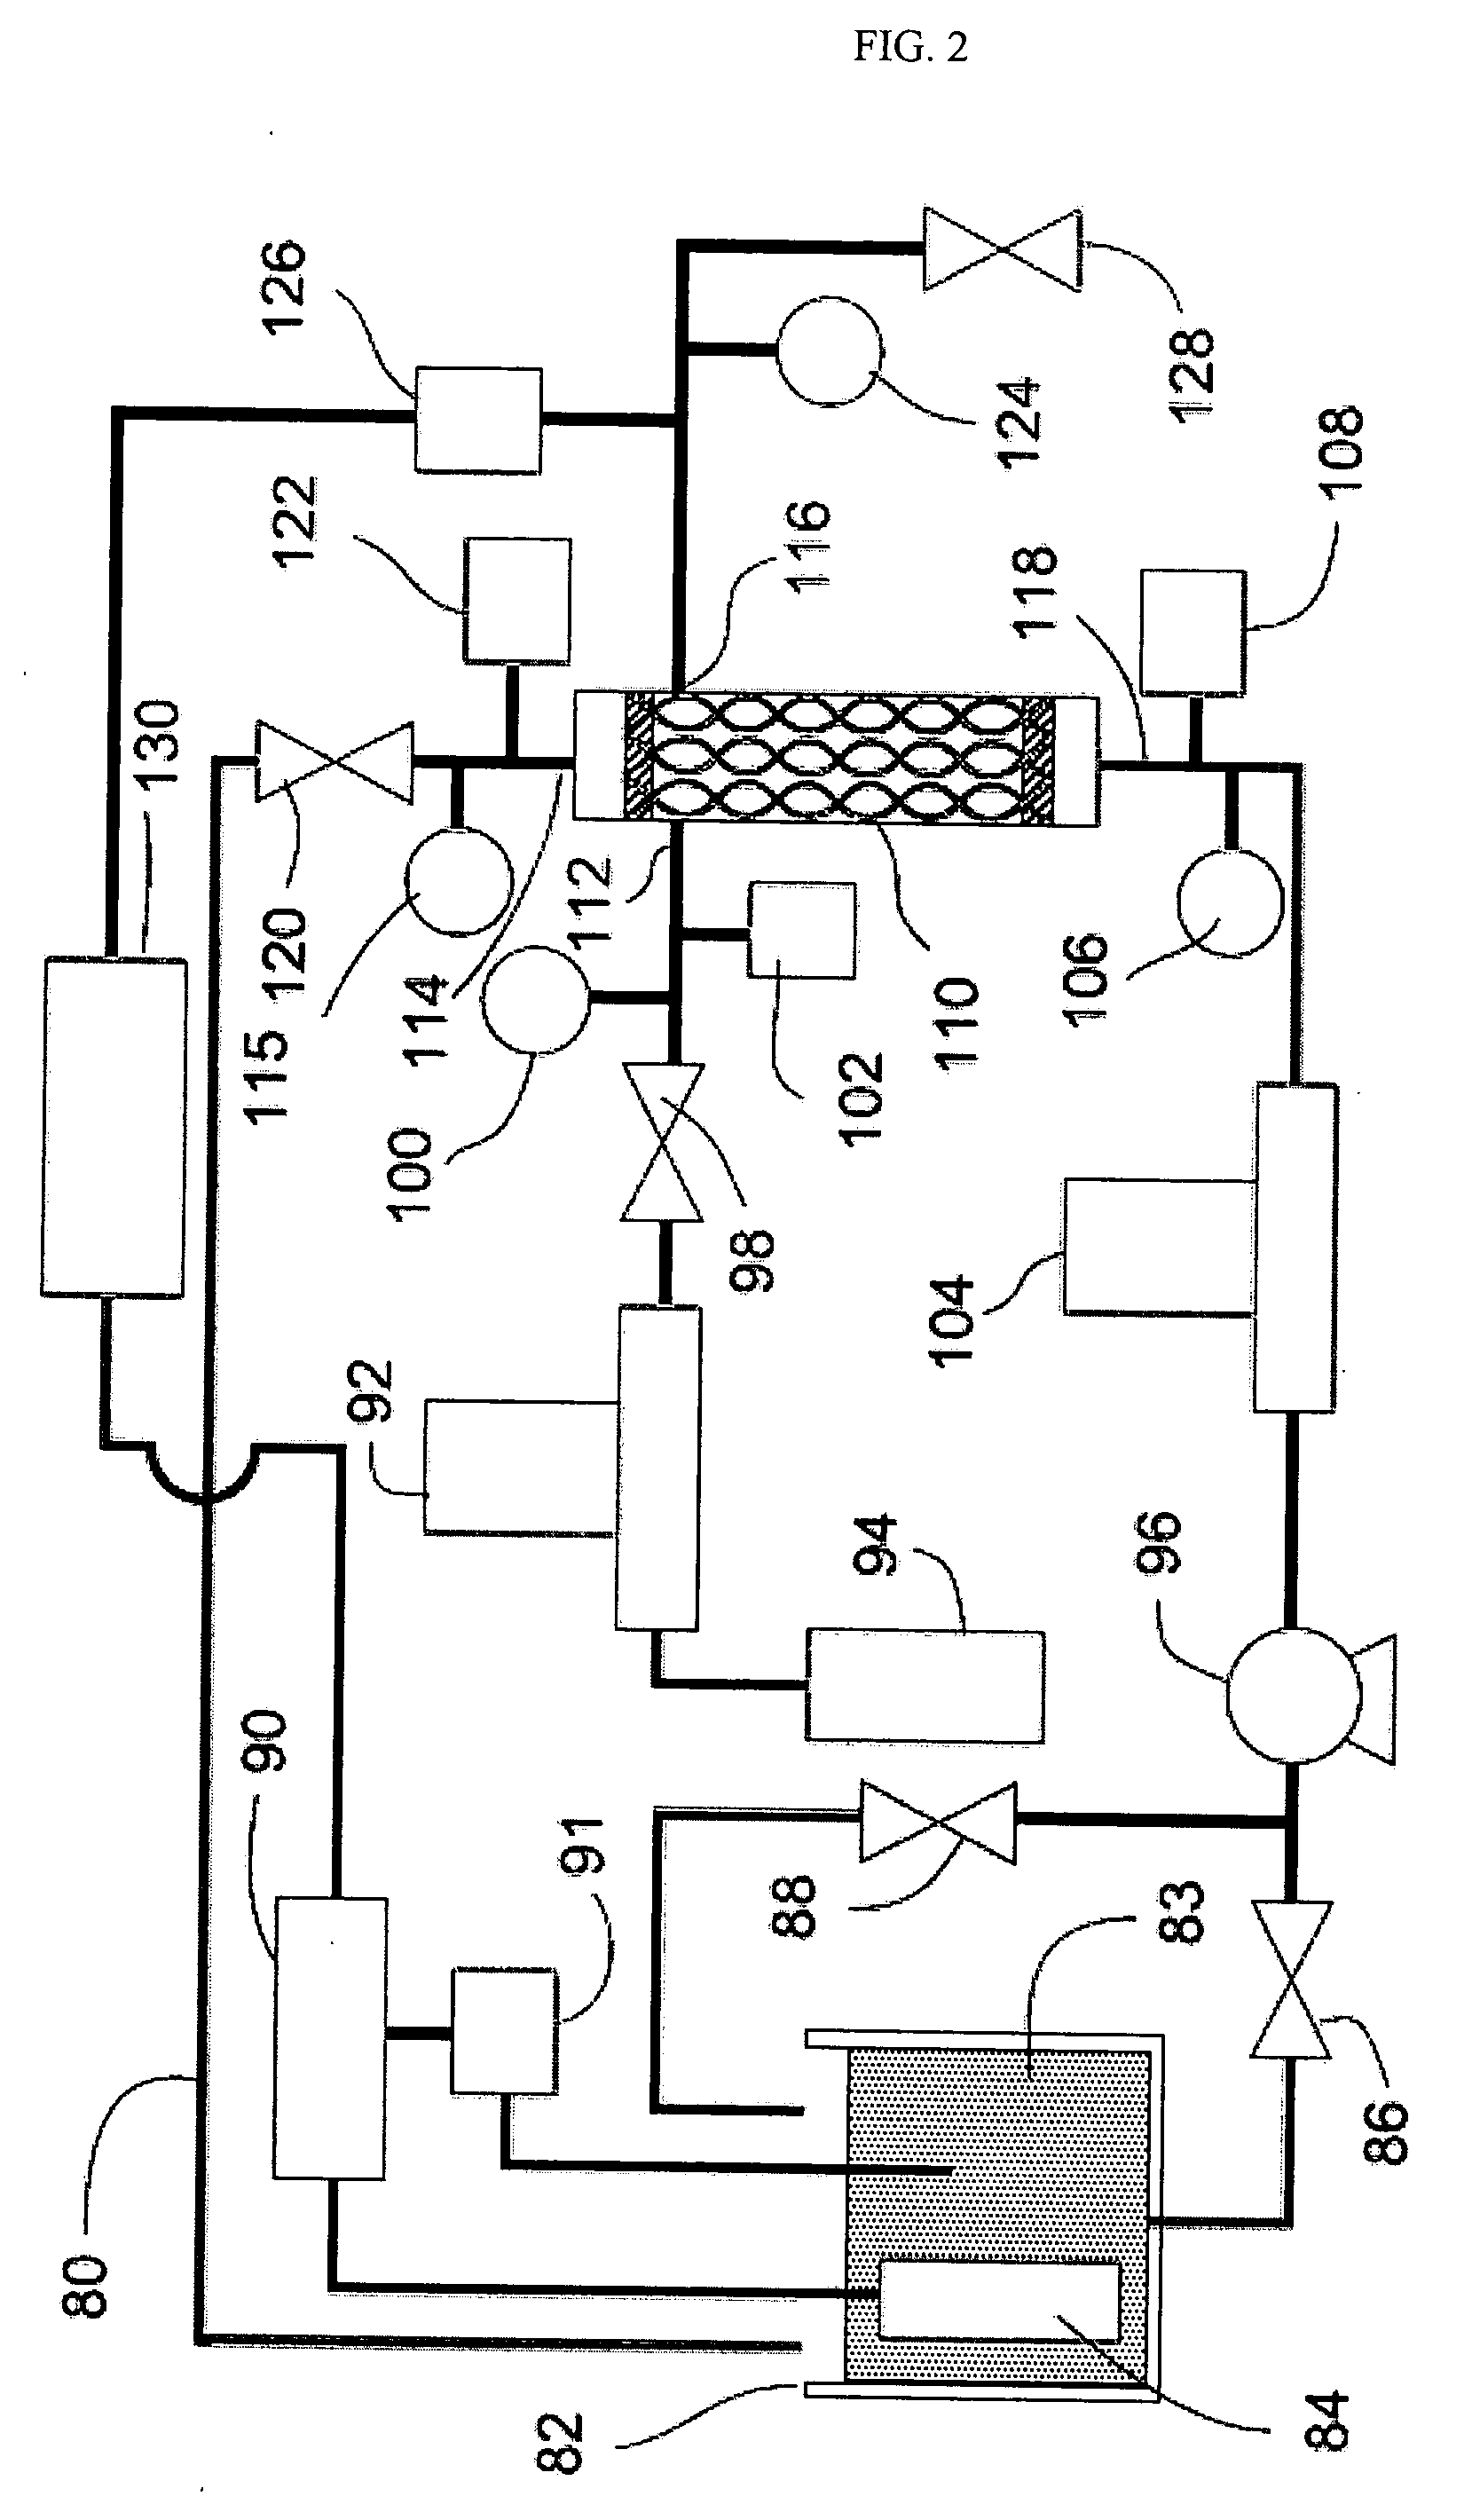 Apparatus for conditioning the temperature of a fluid